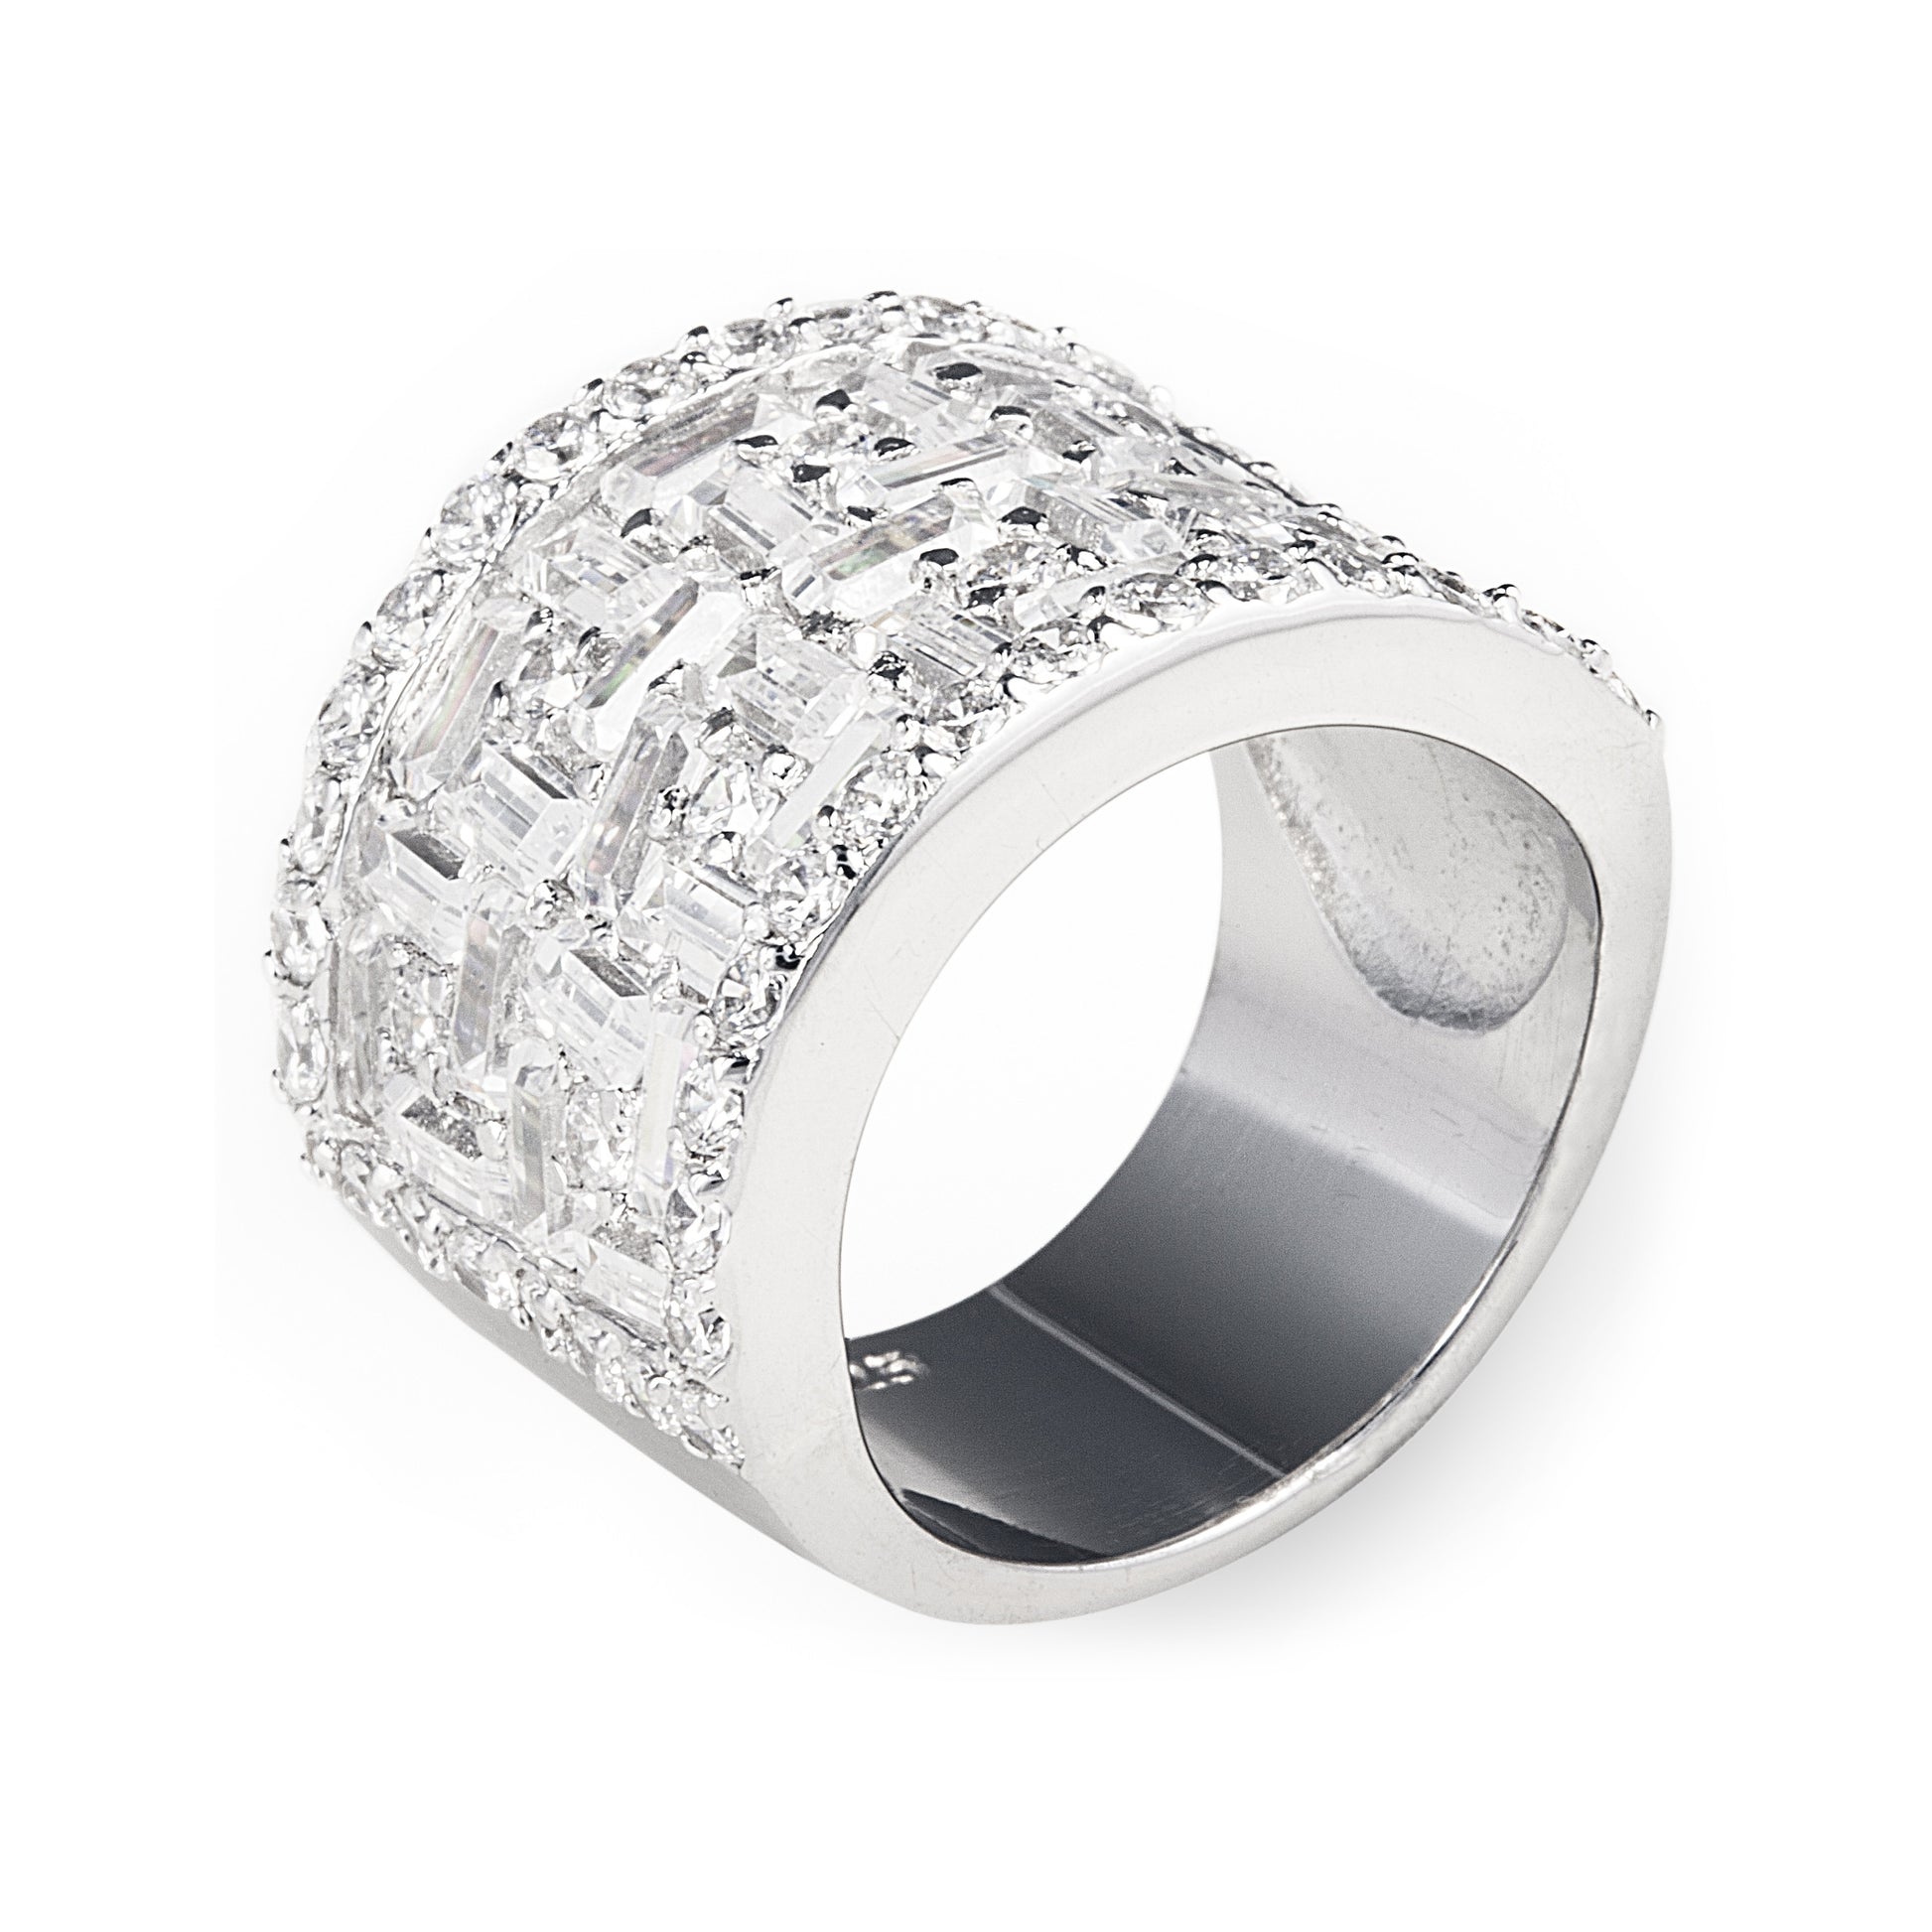 Santuri Ring in 925 sterling silver with a geometric design made with baguette-cut cubic zirconia stones. Worldwide shipping. Affordable luxury jewellery by Bellagio & Co.